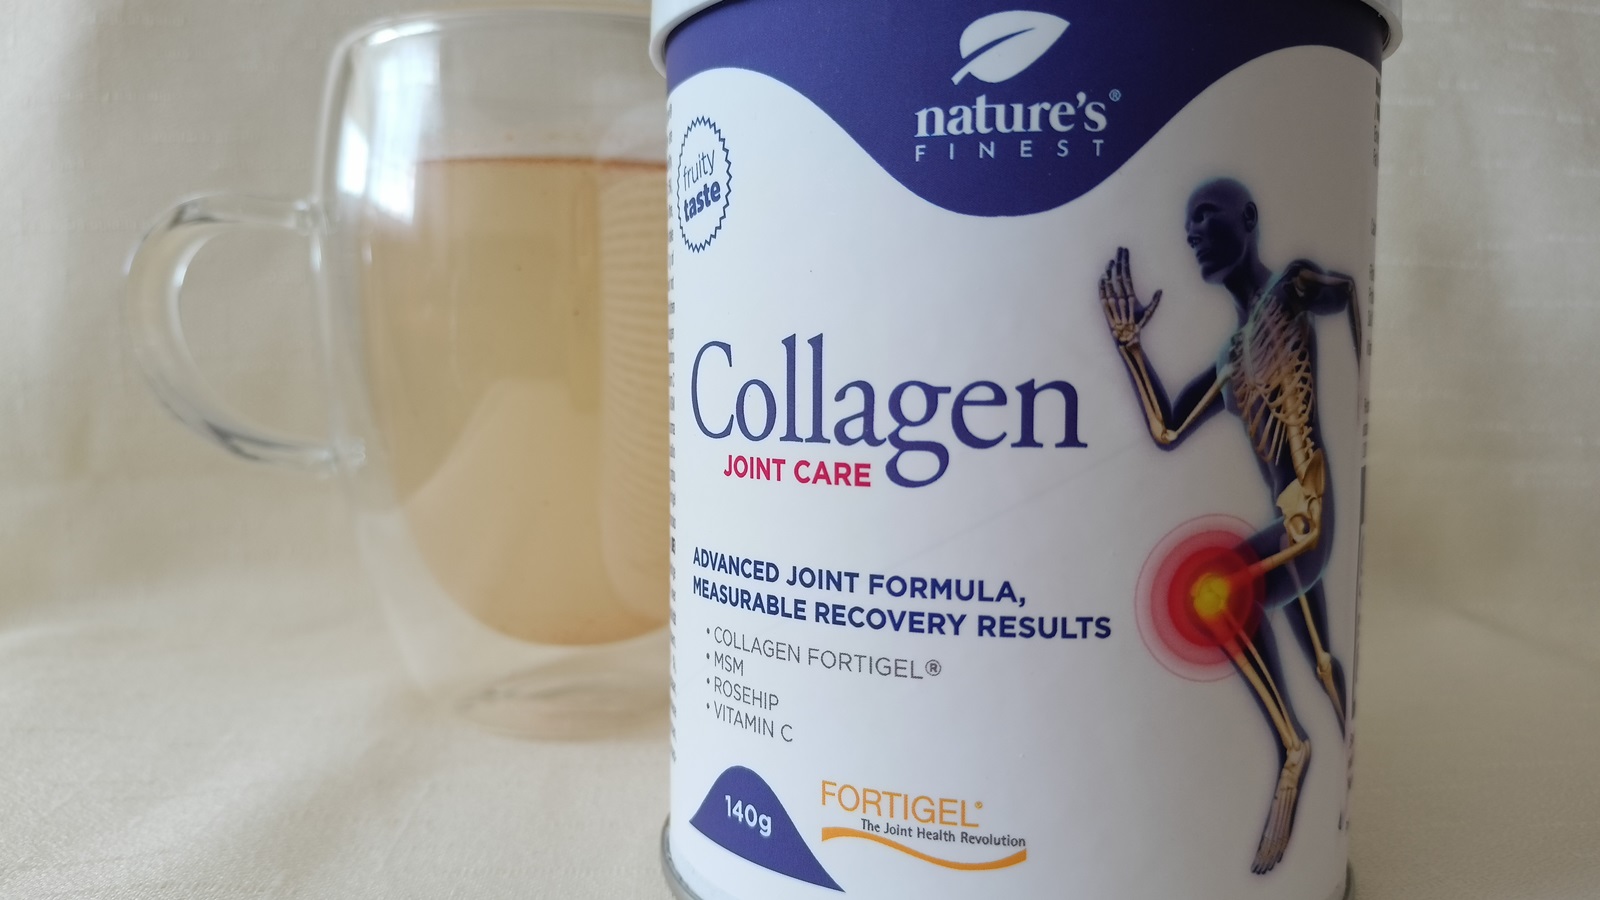 Review: We tried Collagen Joint Care by Nature’s Finest